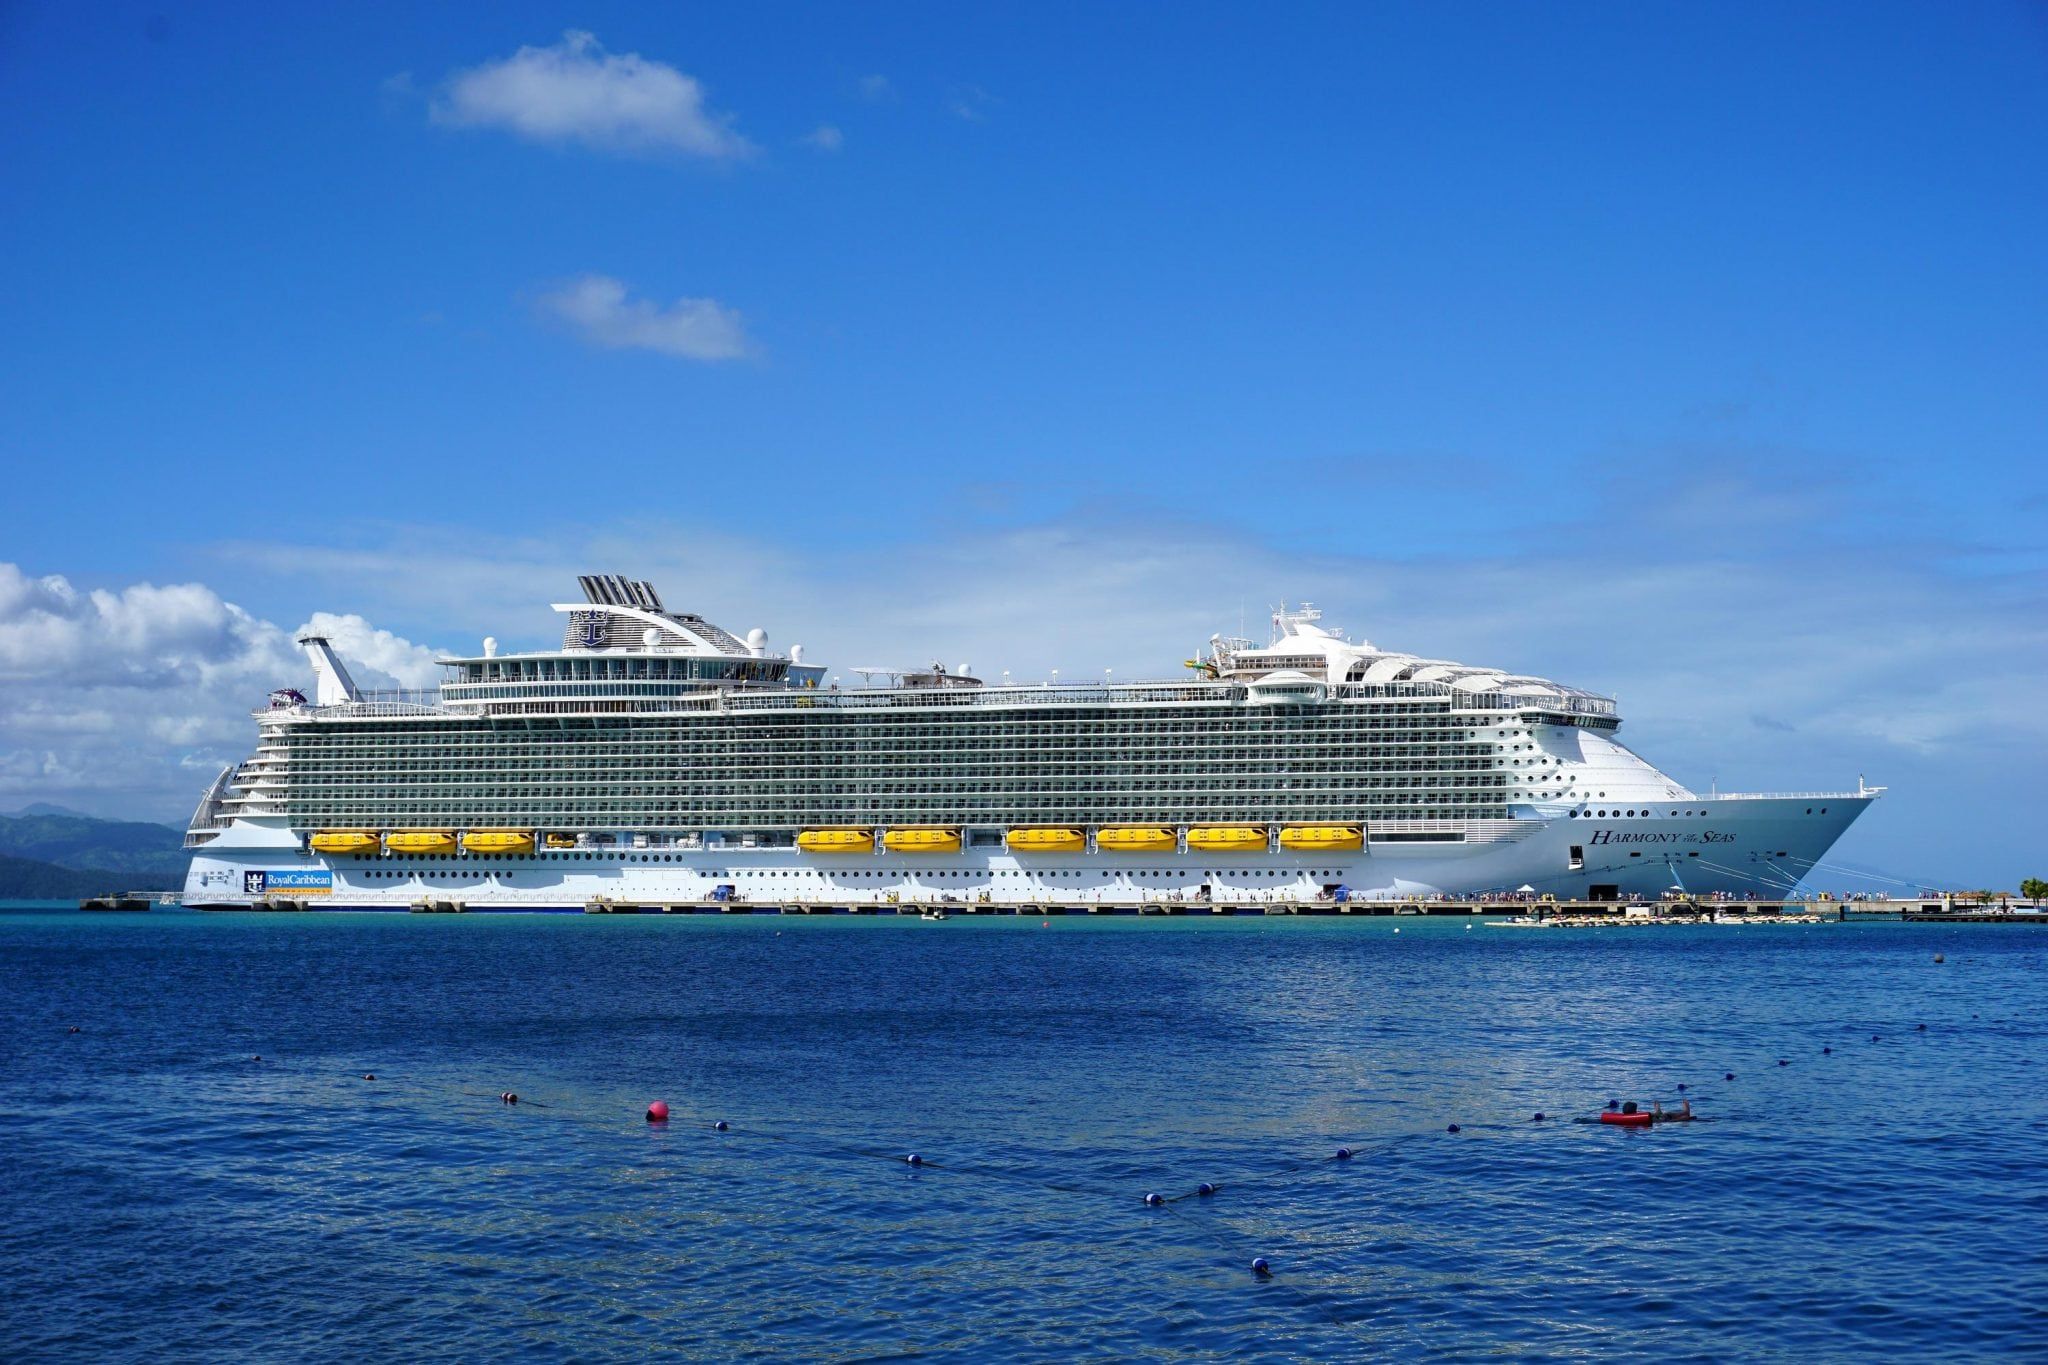 Top 6 Reasons to Get Travel Insurance for a Cruise